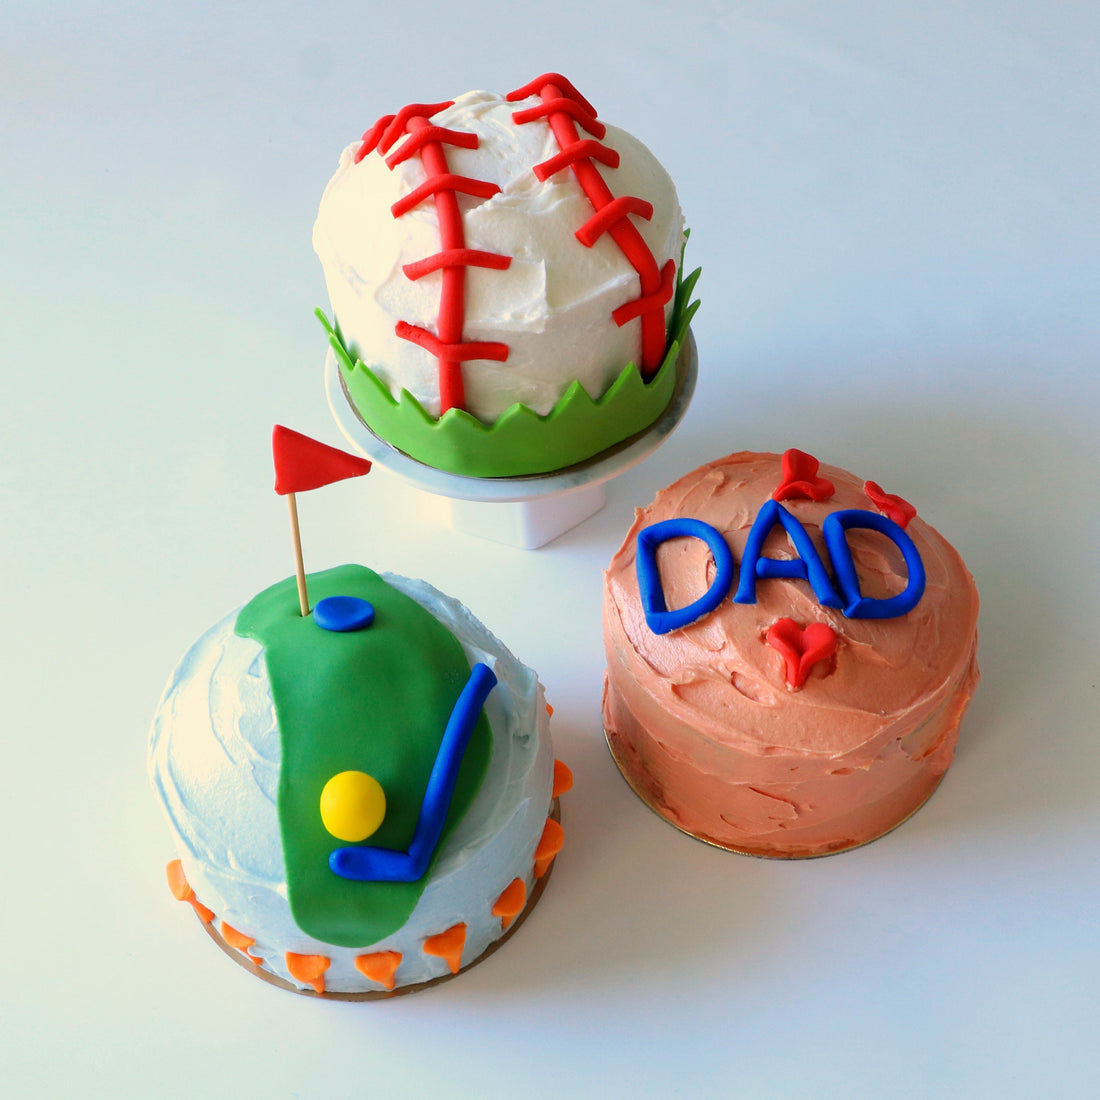 Sport themed mini cakes decorated to celebrate Father's Day